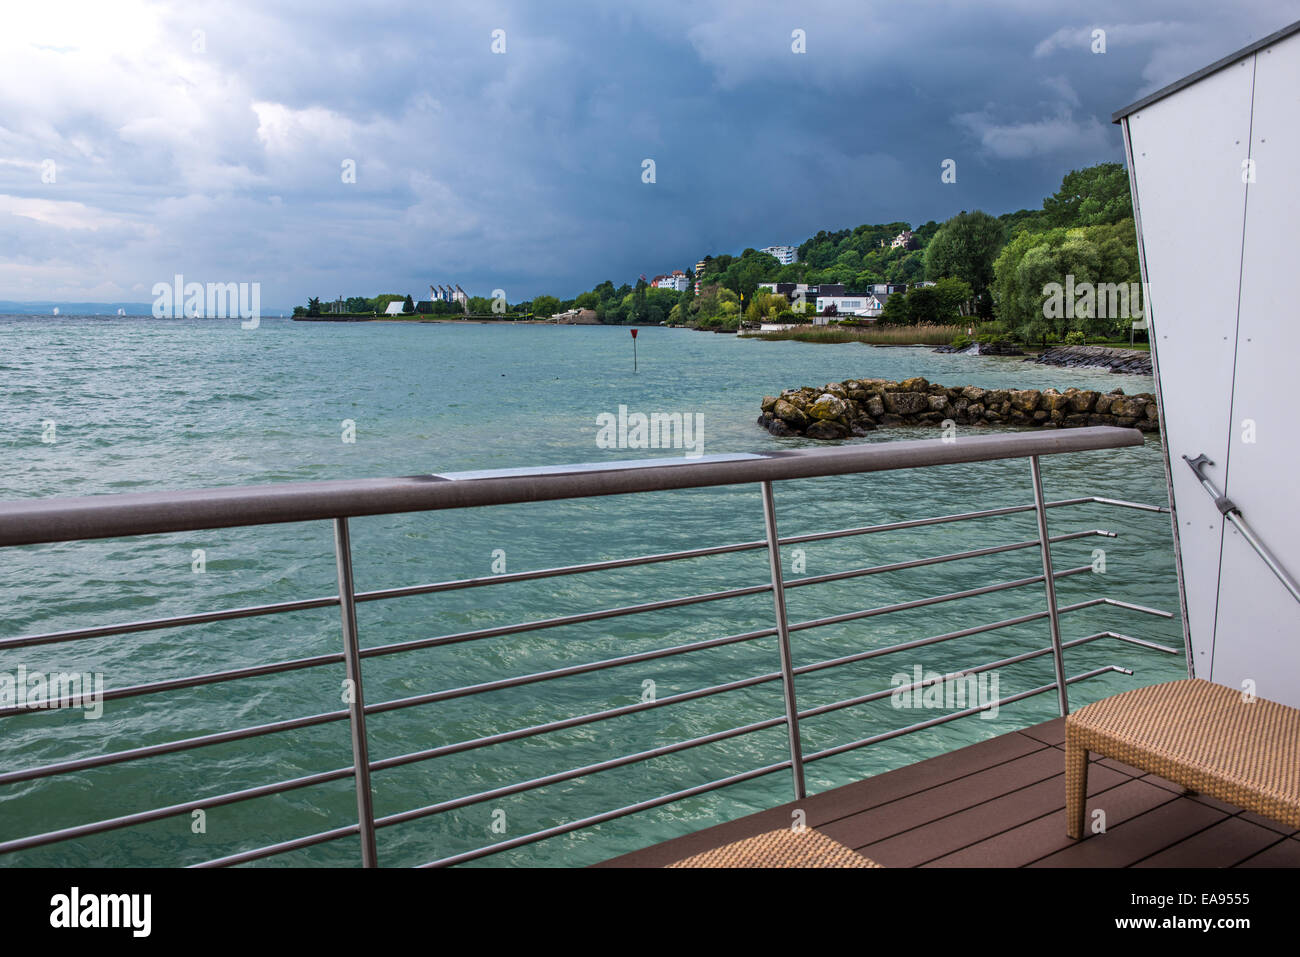 Lake Neuchatel seen from the private wharf of a luxury hotel room in a day of stormy weather Stock Photo